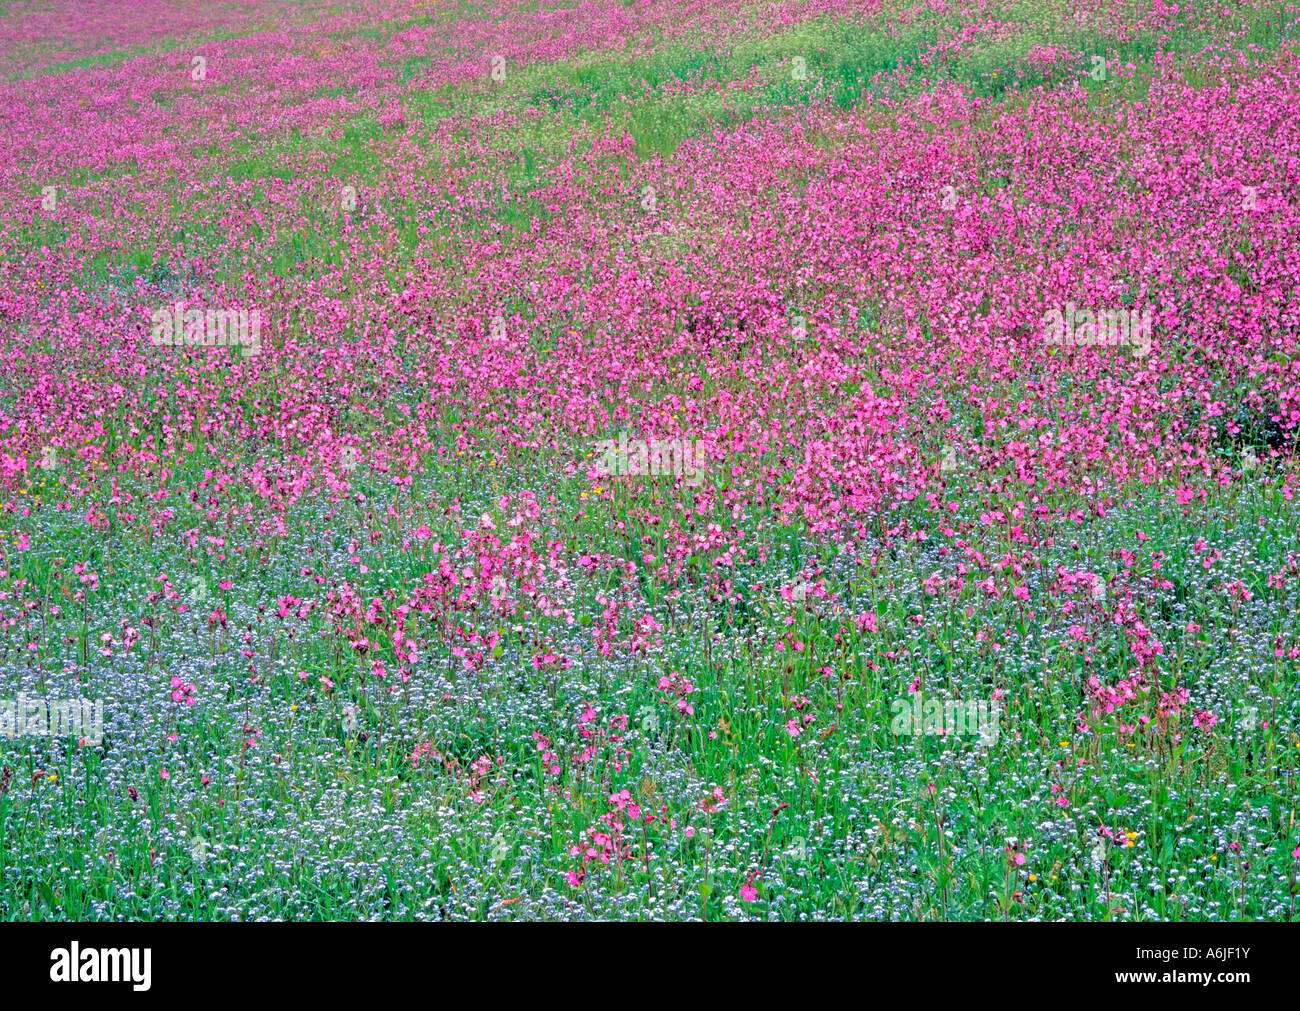 Red Campion (Silene dioica) and Wood Forget me not (Myosotis sylvatica) on a flowering meadow Stock Photo